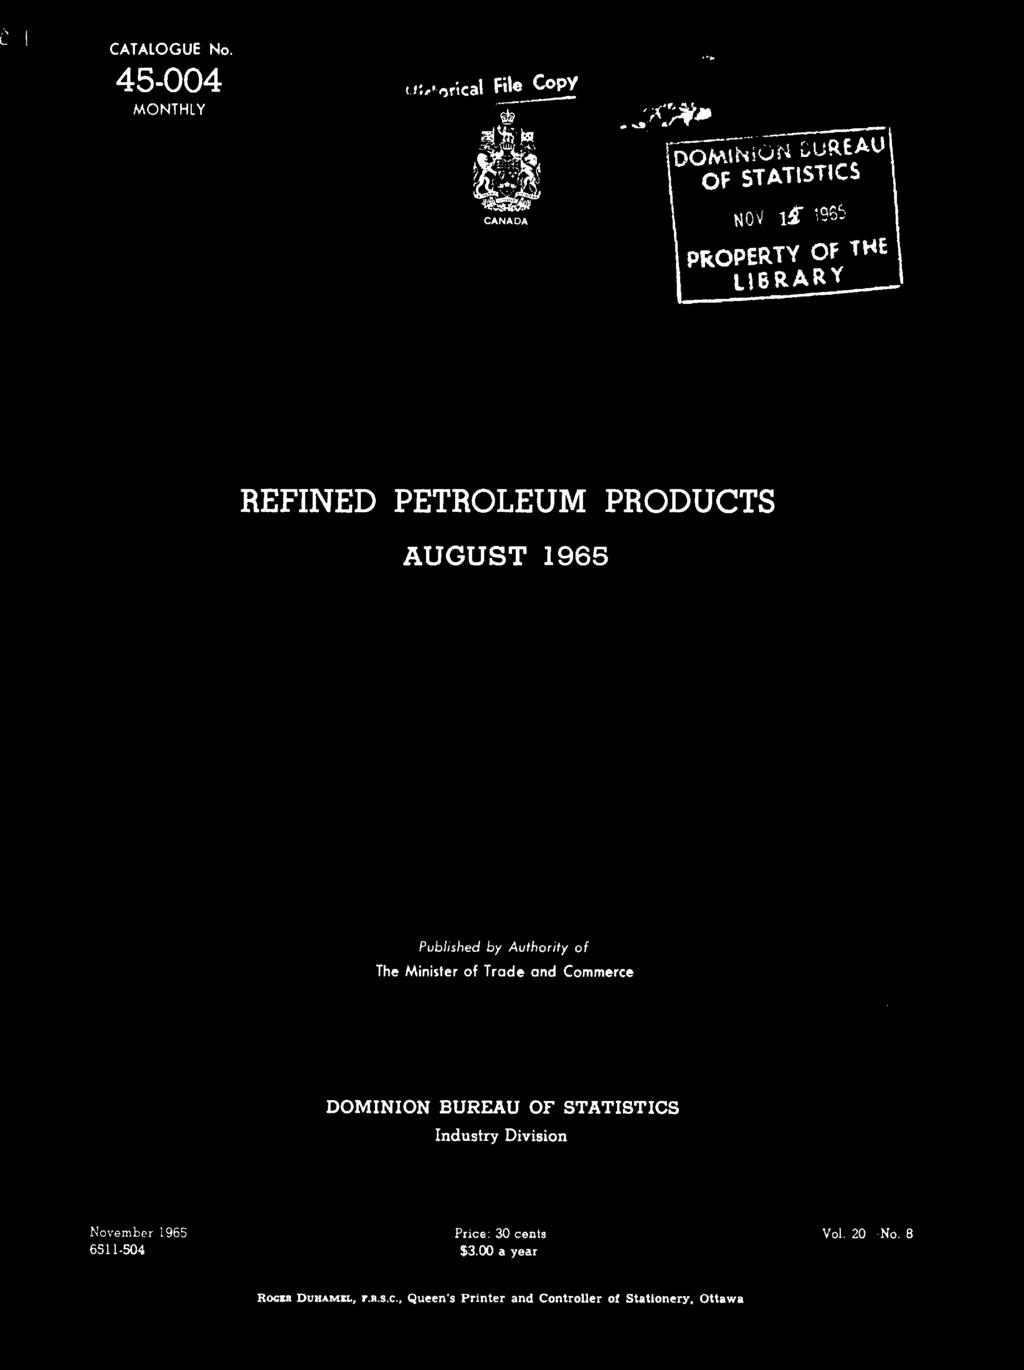 1965 Published by Authority of The Minister of Trade and Commerce DOMINION BUREAU OF STATISTICS